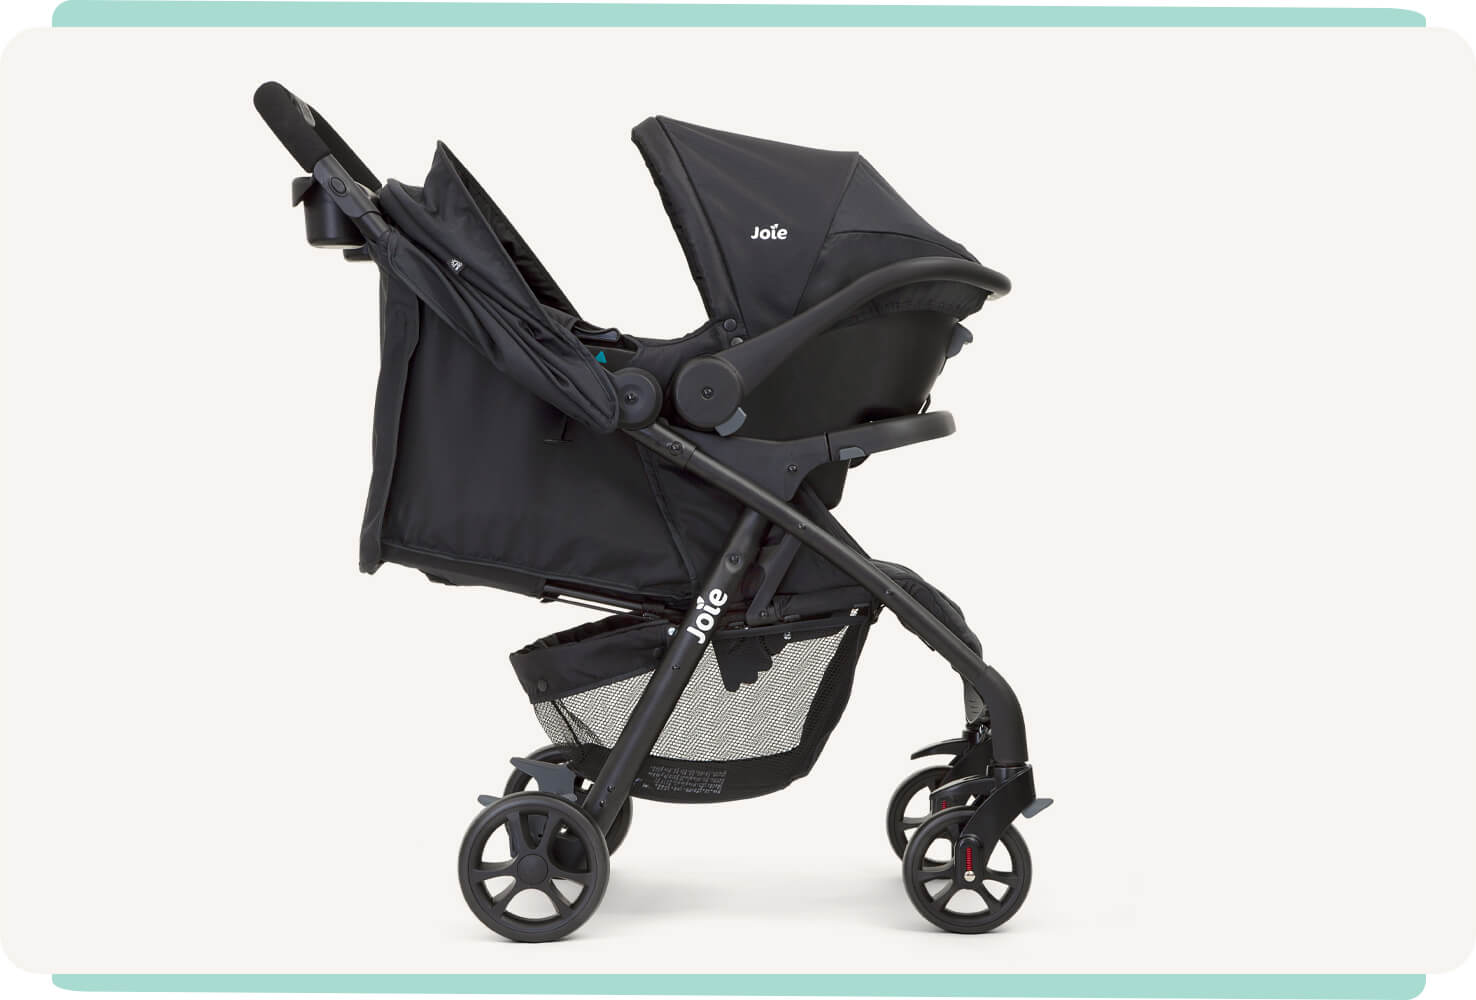   Side profile of Joie black muze lx travel system with infant carrier.

